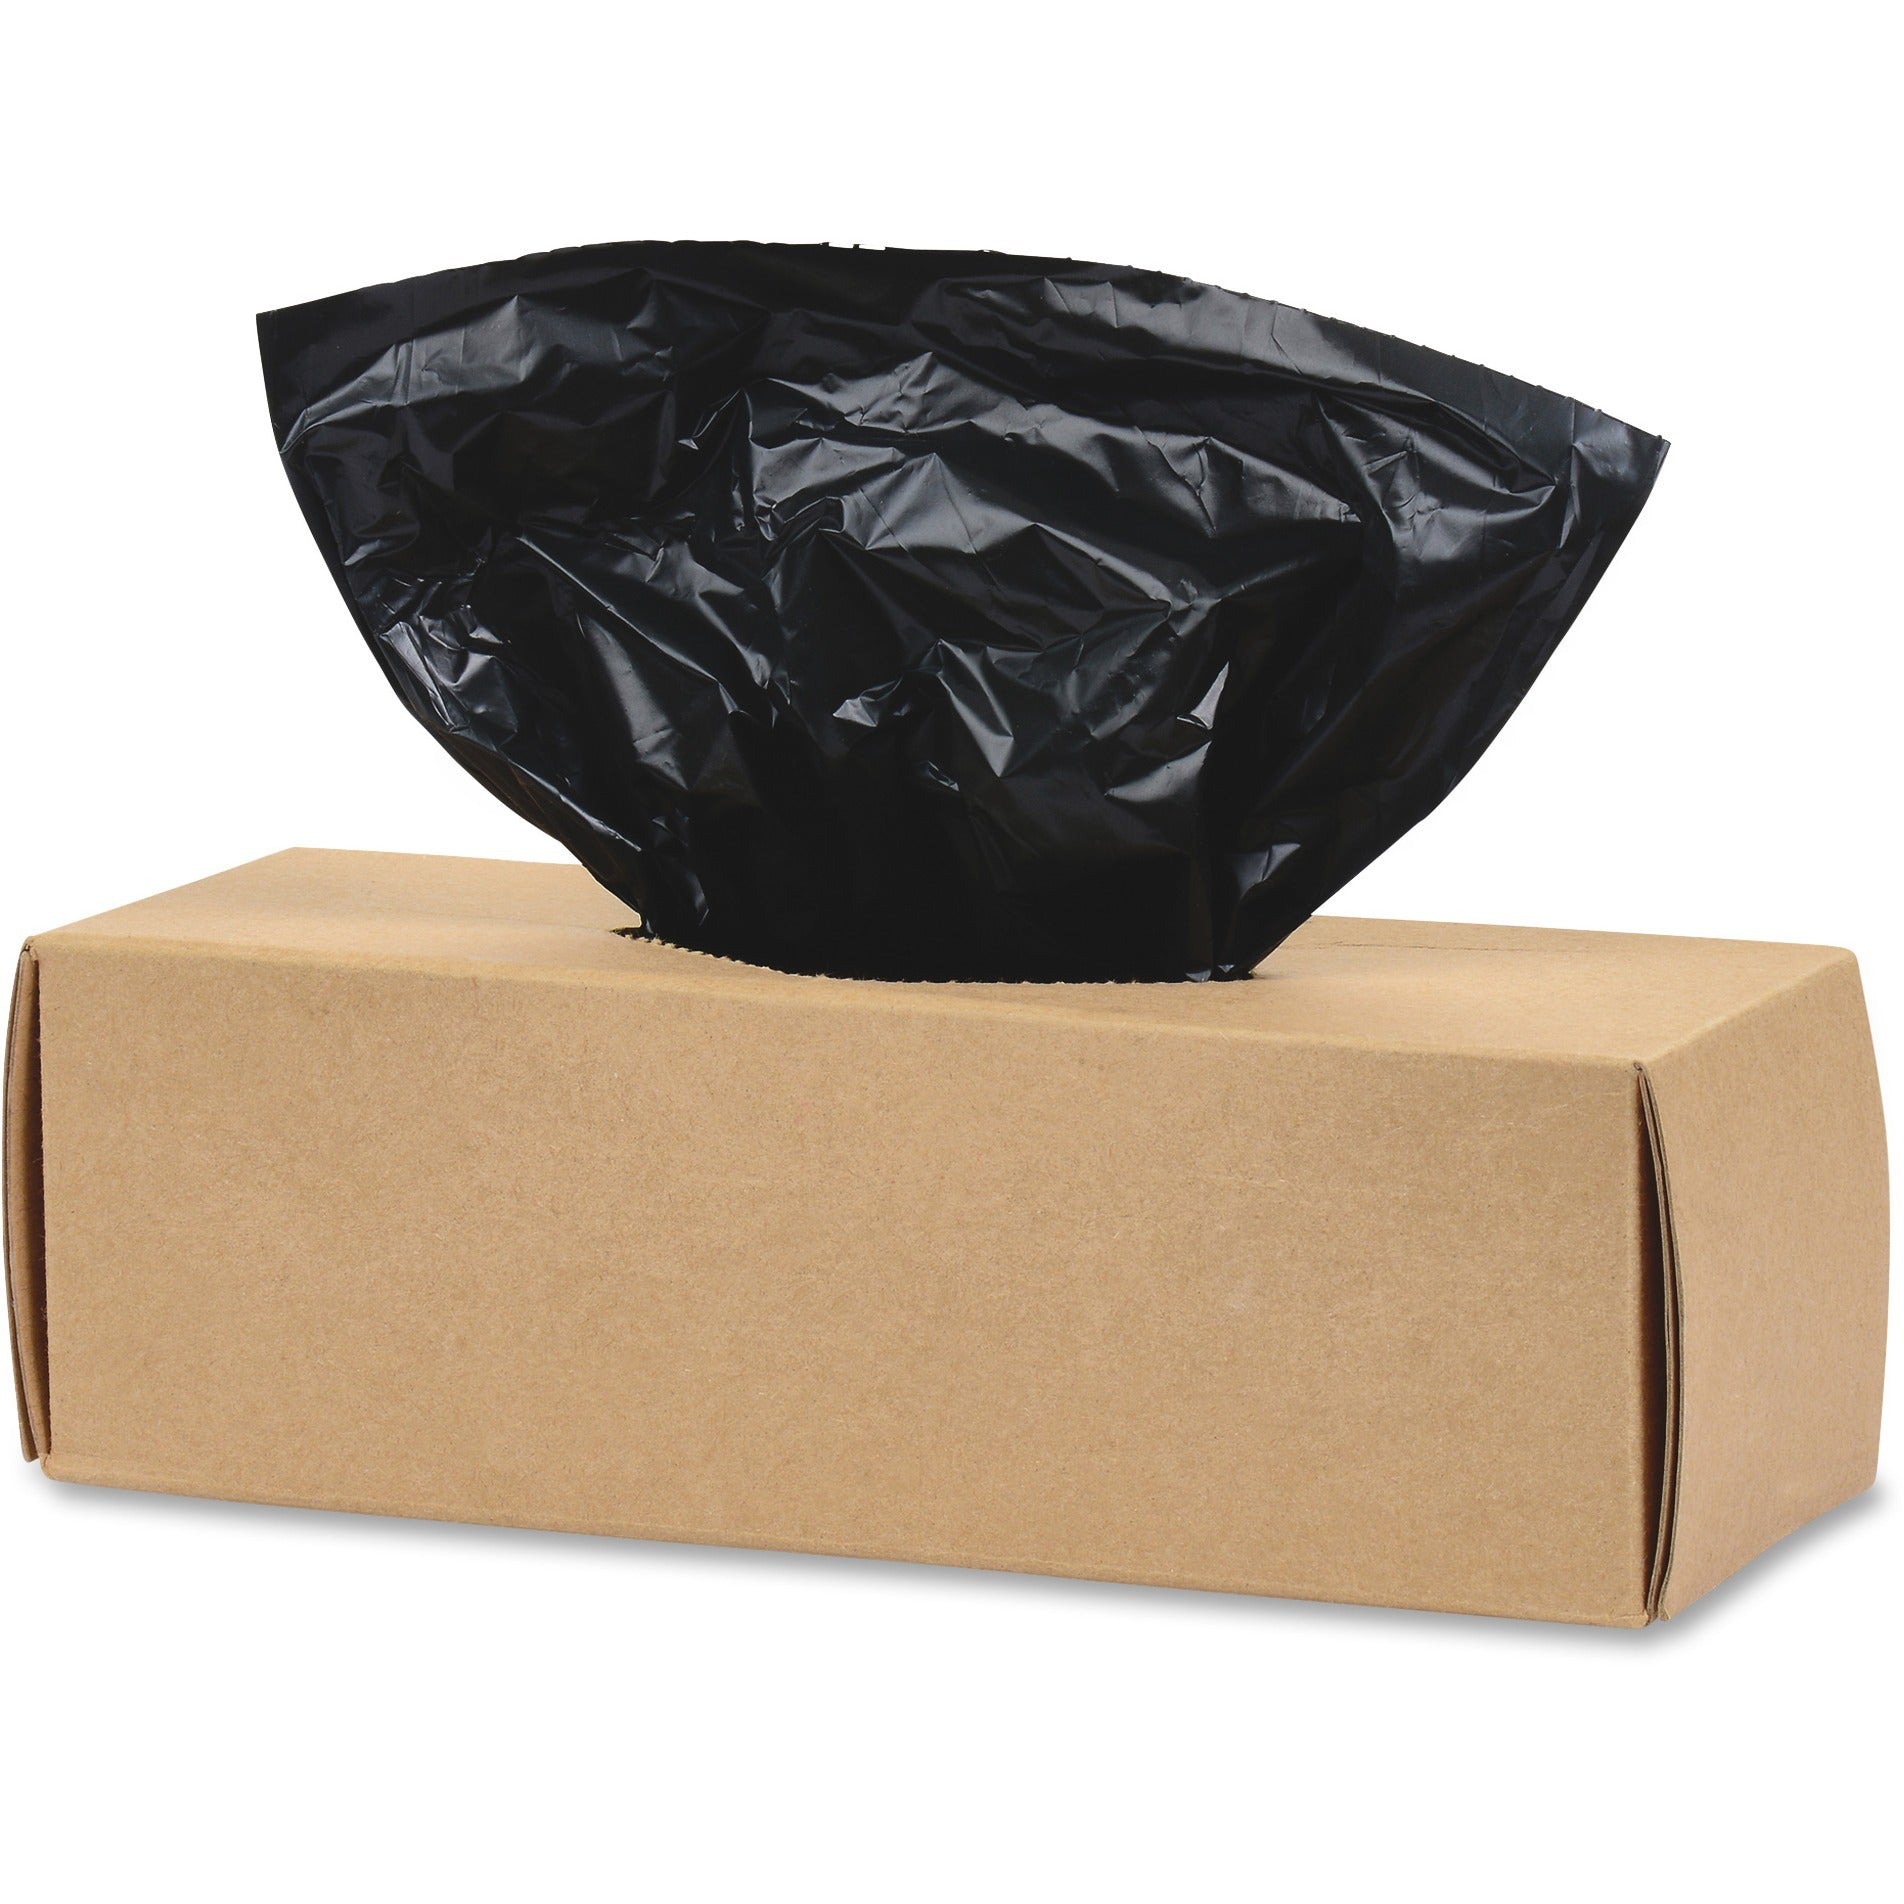 tatco-dog-waste-station-refill-bags-black-10-carton-200-per-box-waste-disposal-office-park-home_tco28600 - 2